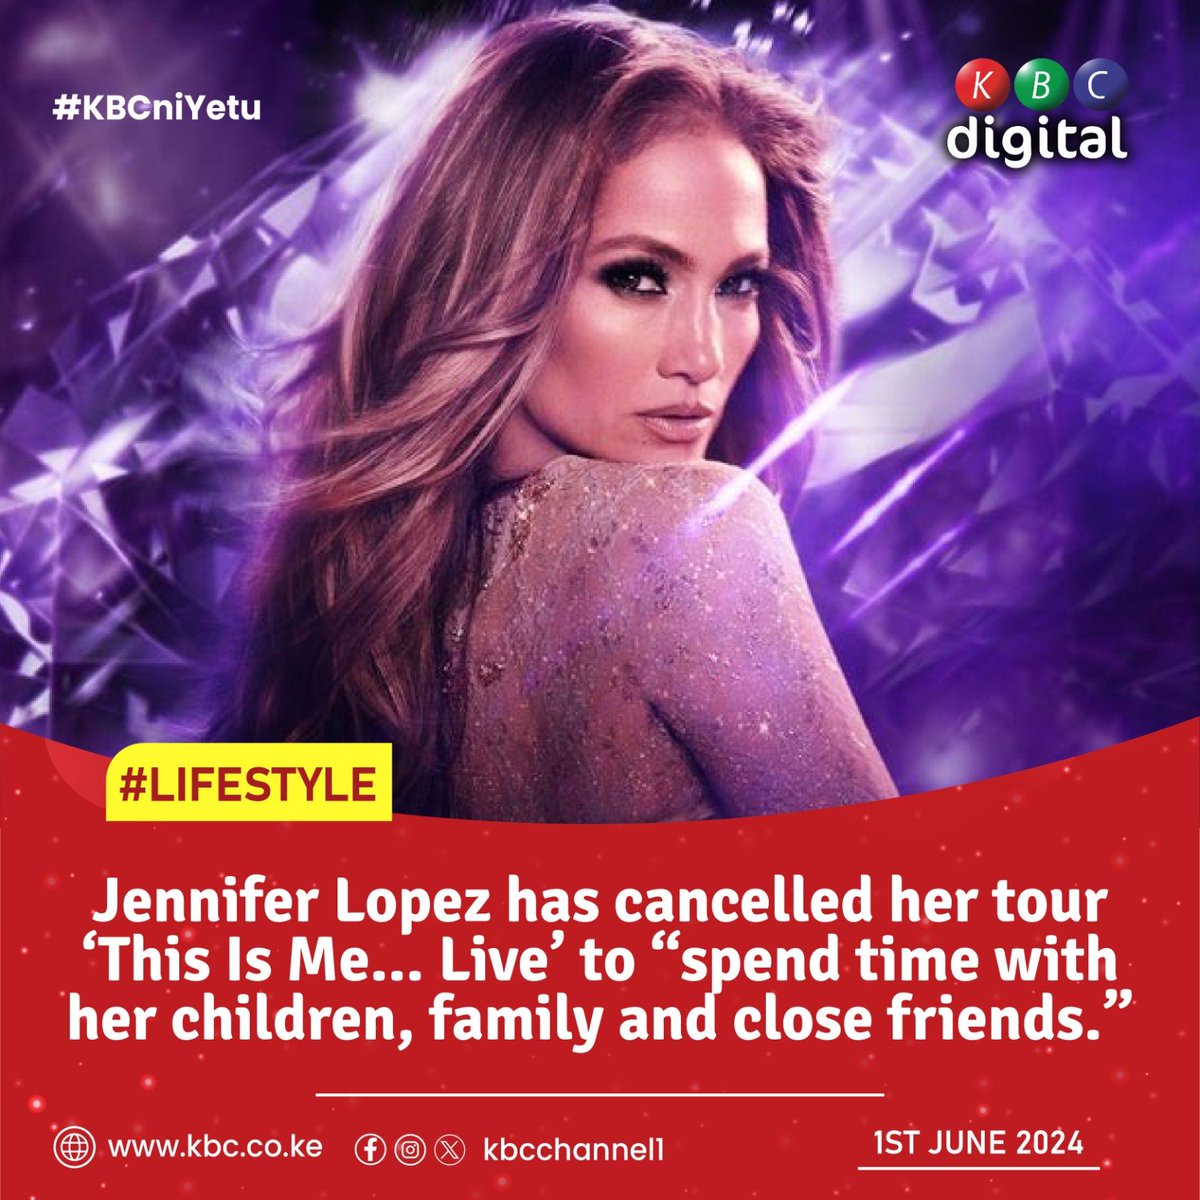 Jennifer Lopez has cancelled her tour ‘This Is Me... Live’ to “spend time with her children, family and close friends.” #KBCniYetu ^RO